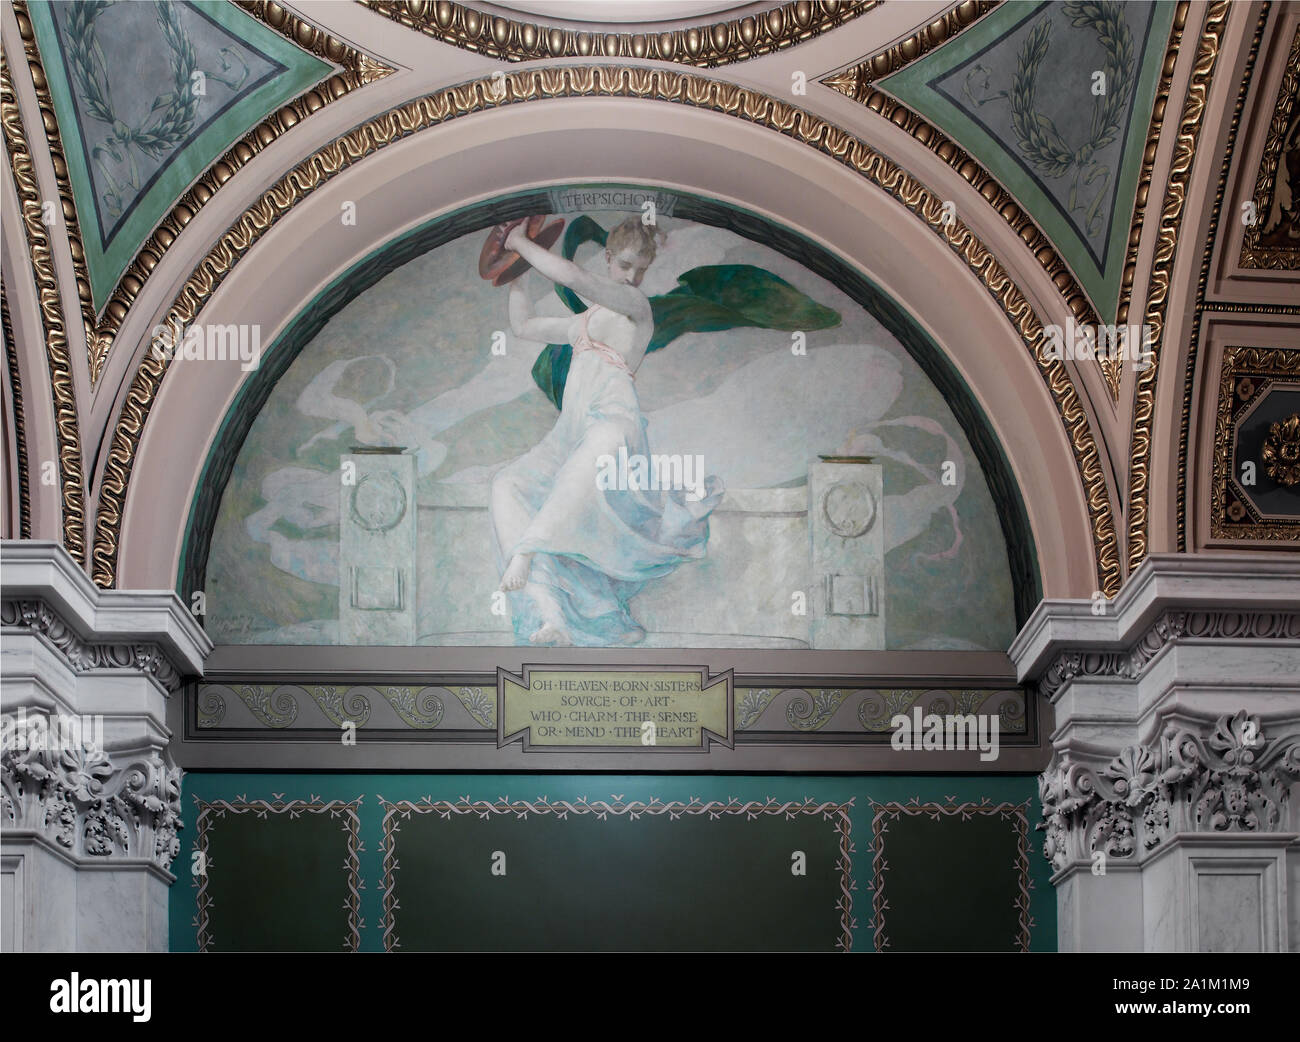 Northwest Corridor, First Floor. Mural depicting the muse Terpsichore (Dancing), by Edward Simmons, with quotation beginning Oh heaven born sisters .... Library of Congress Thomas Jefferson Building, Washington, D.C. Stock Photo